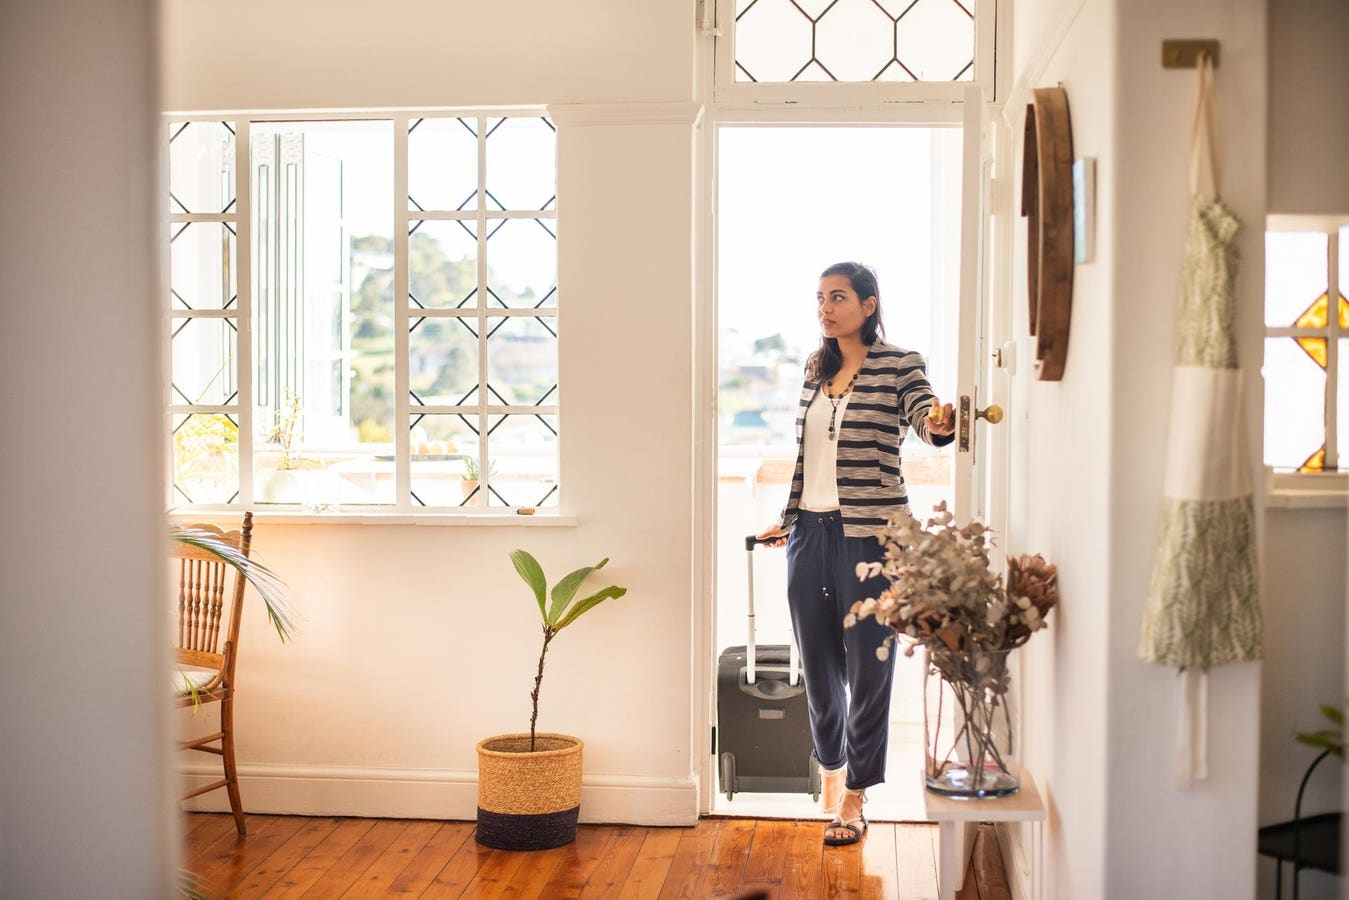 The Free Apps That Will Find Hidden Cameras In An Airbnb—Or Your Home